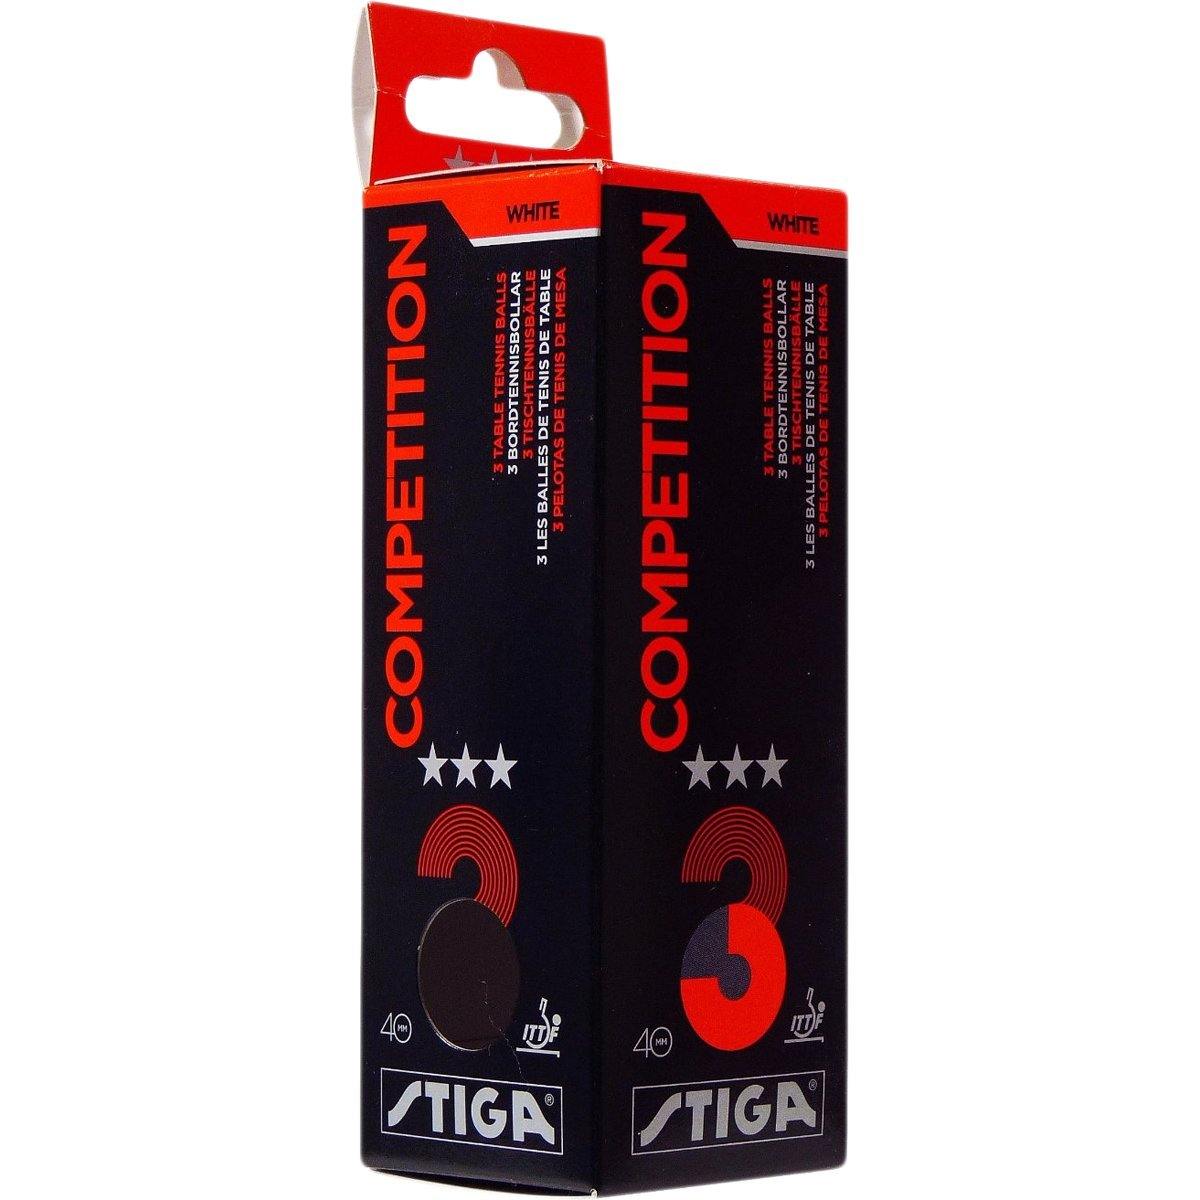 Stiga Competition Table Tennis Ball Pack of 3 - Best Price online Prokicksports.com